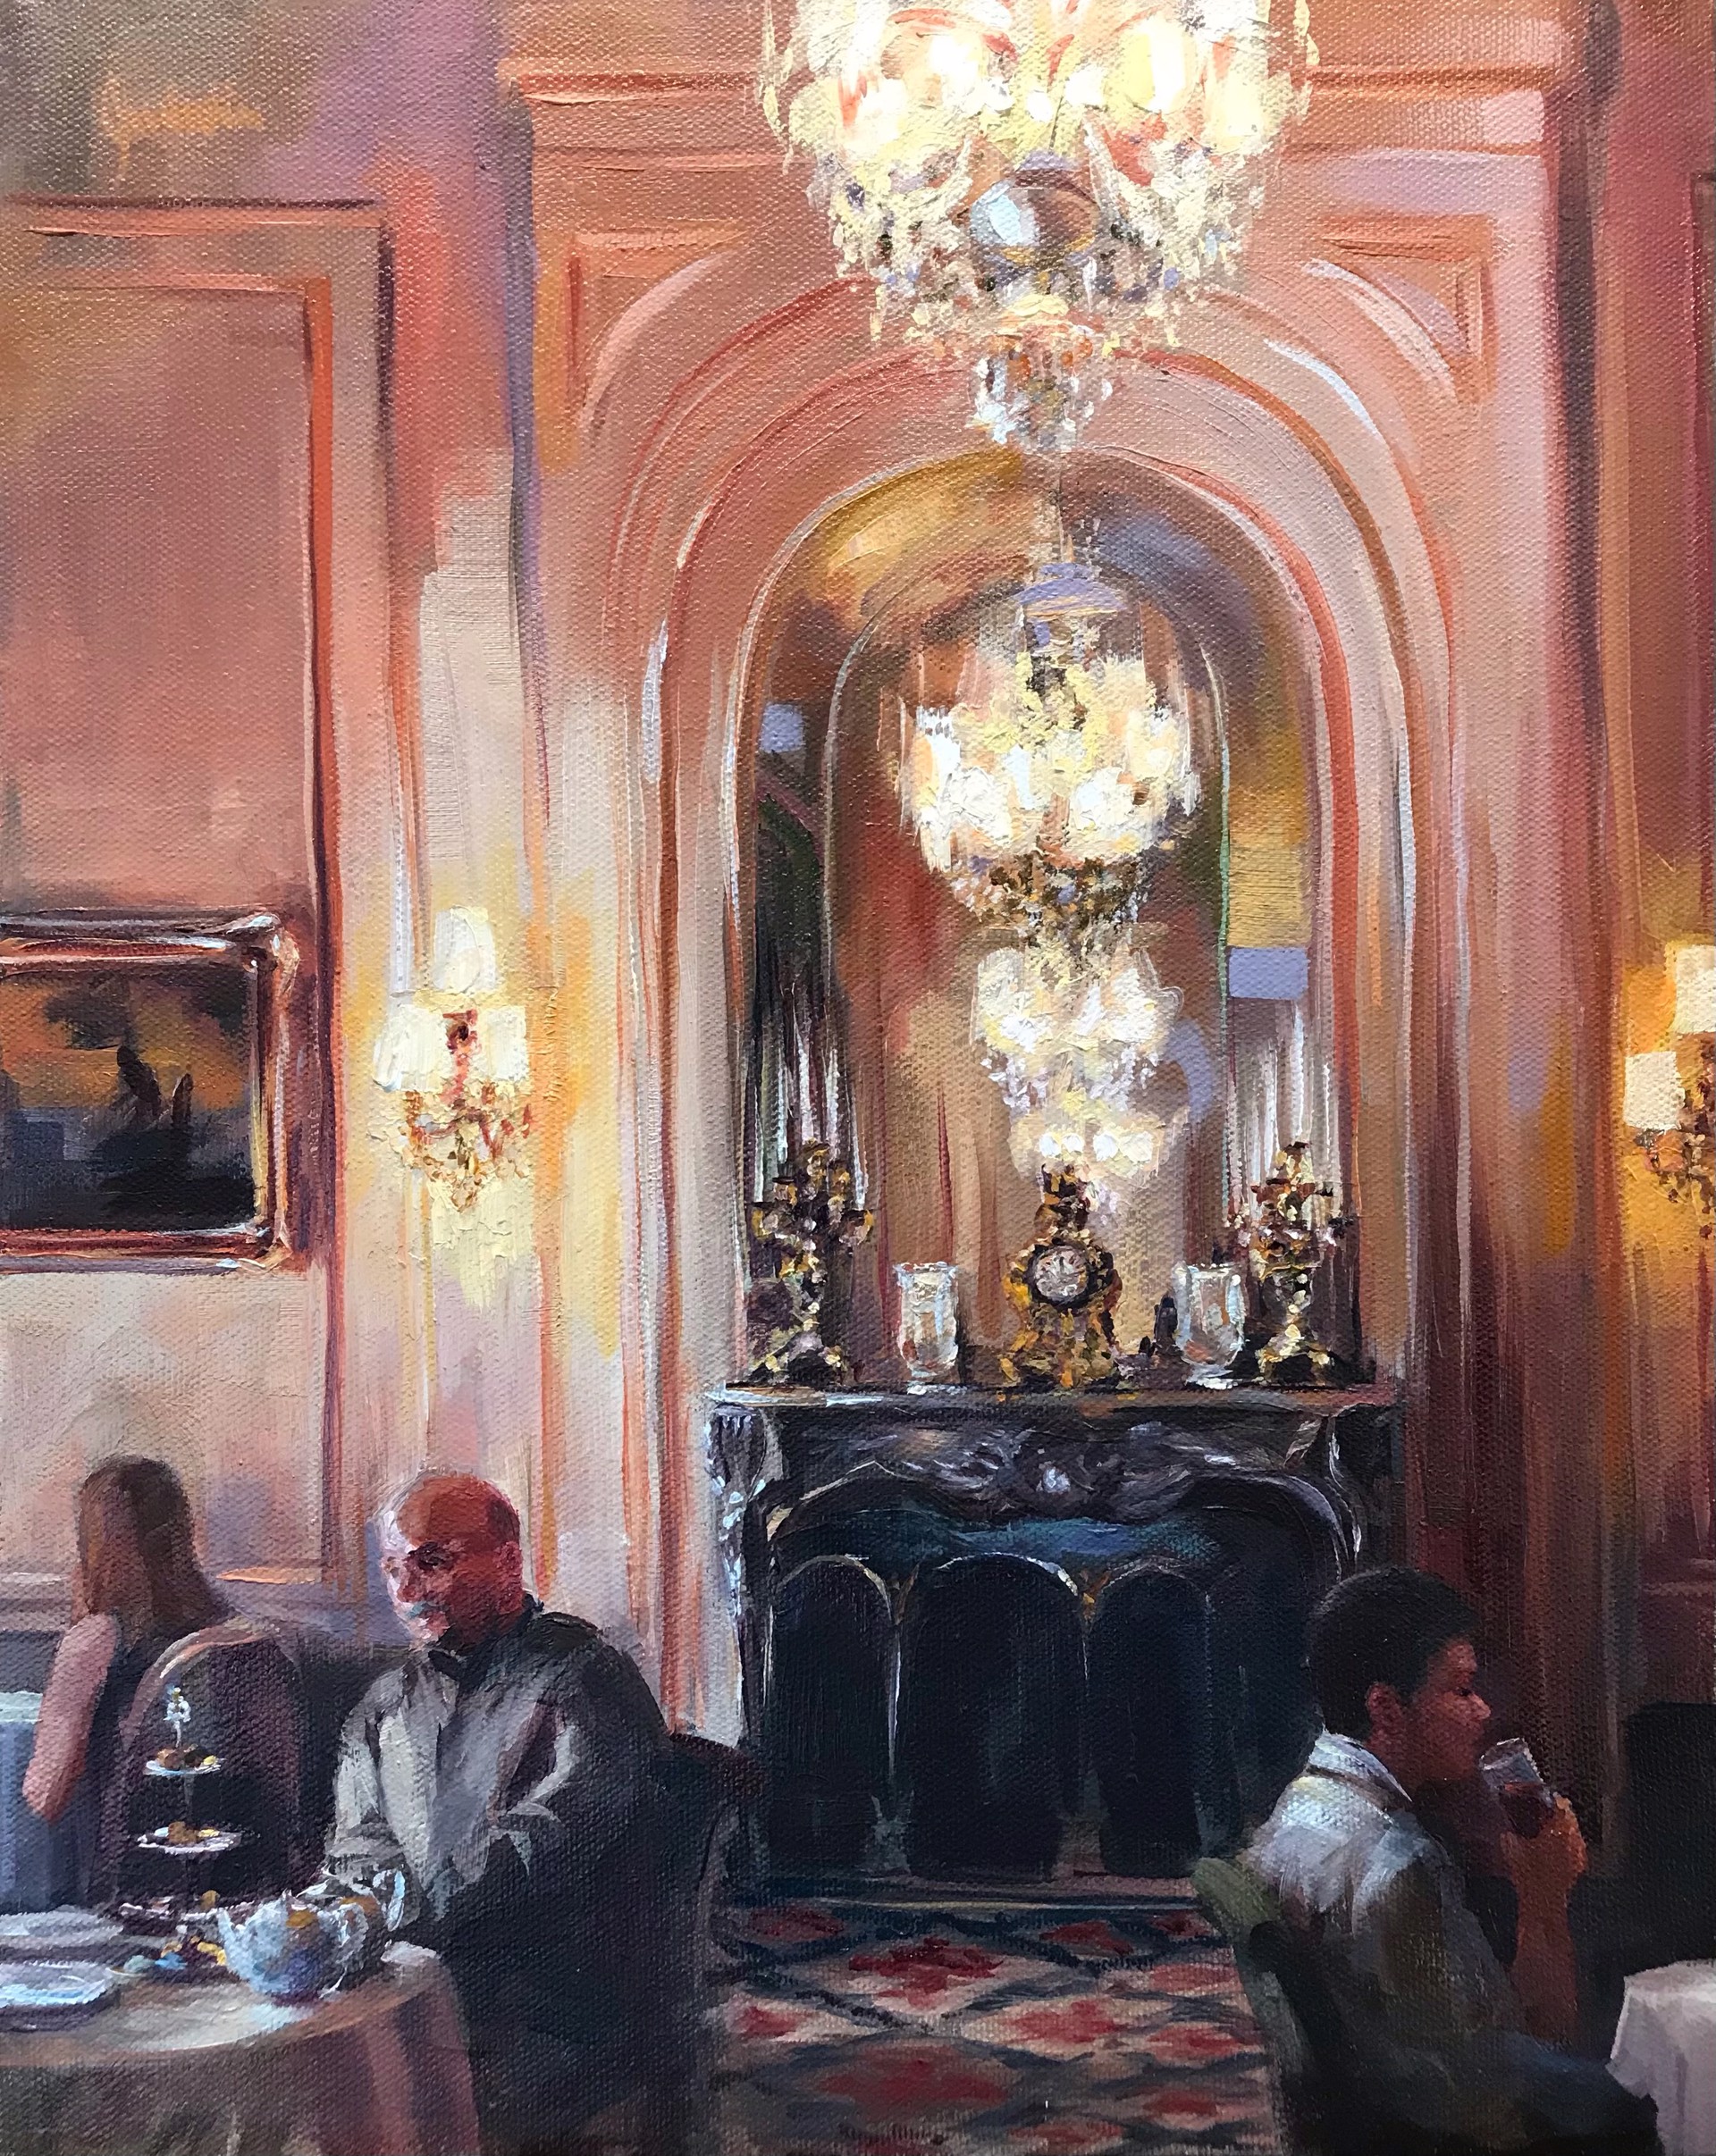 Study of the Ritz, San Francisco by Lindsay Goodwin